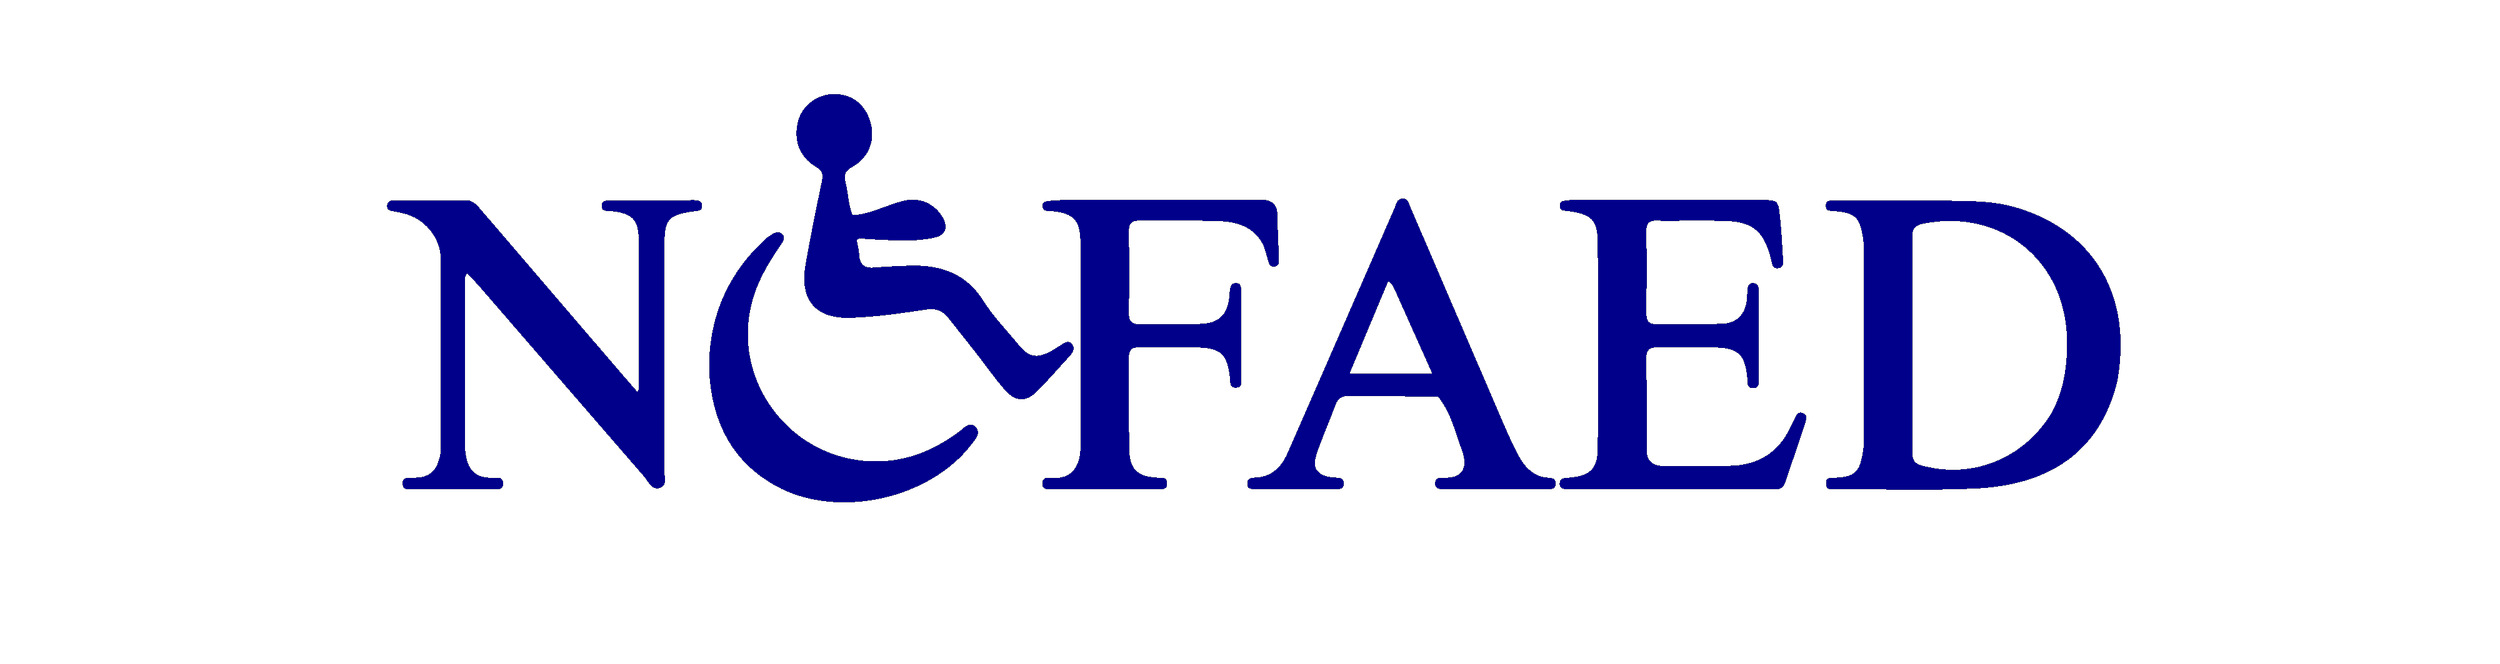 National Coalition of Federal Aviation Employees with Disabilities (NCFAED)